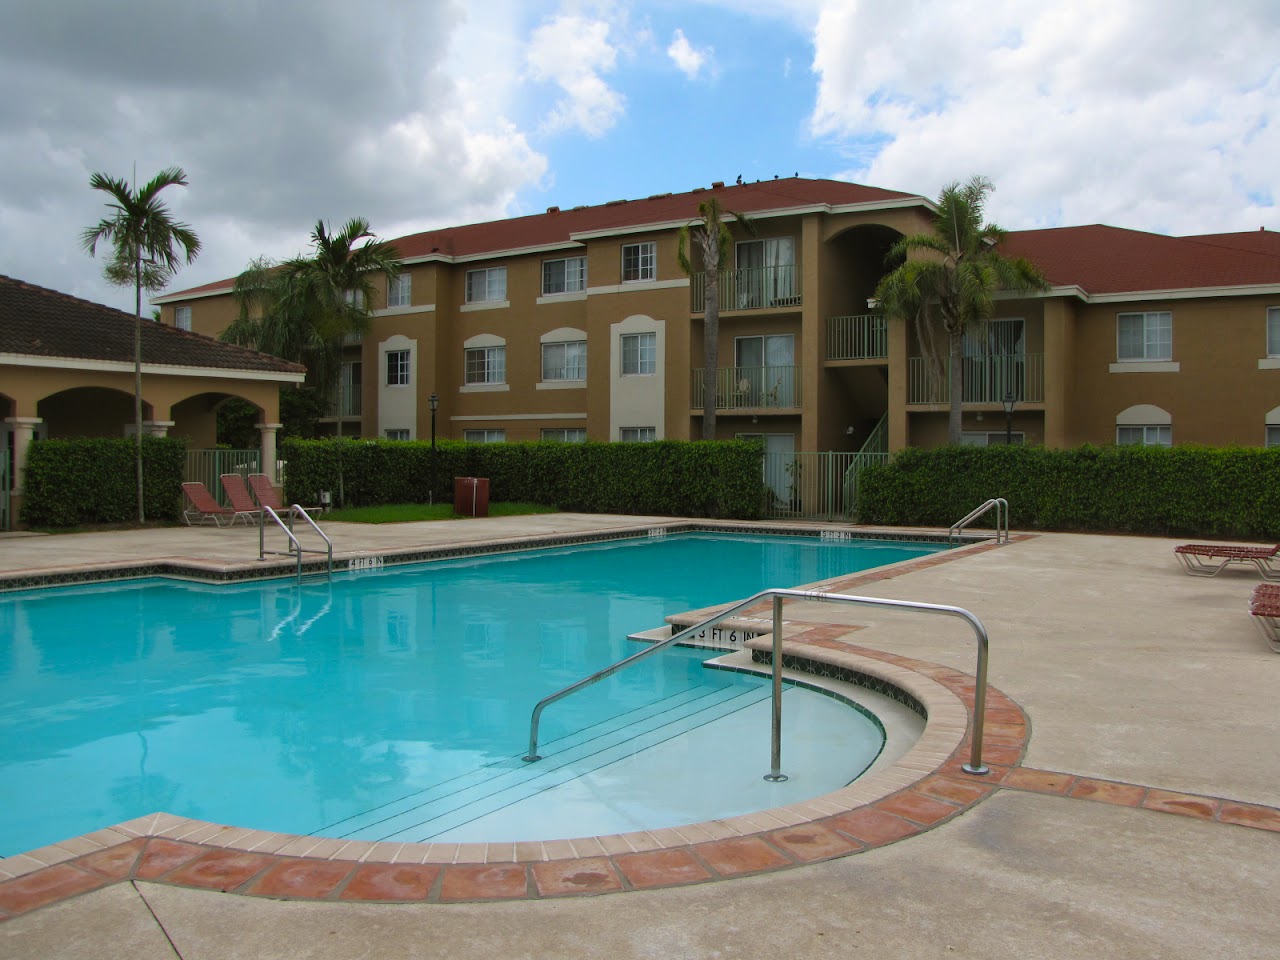 Photo of CROSSINGS AT UNIVERSITY. Affordable housing located at 18740 NW 27TH AVE OPA LOCKA, FL 33056